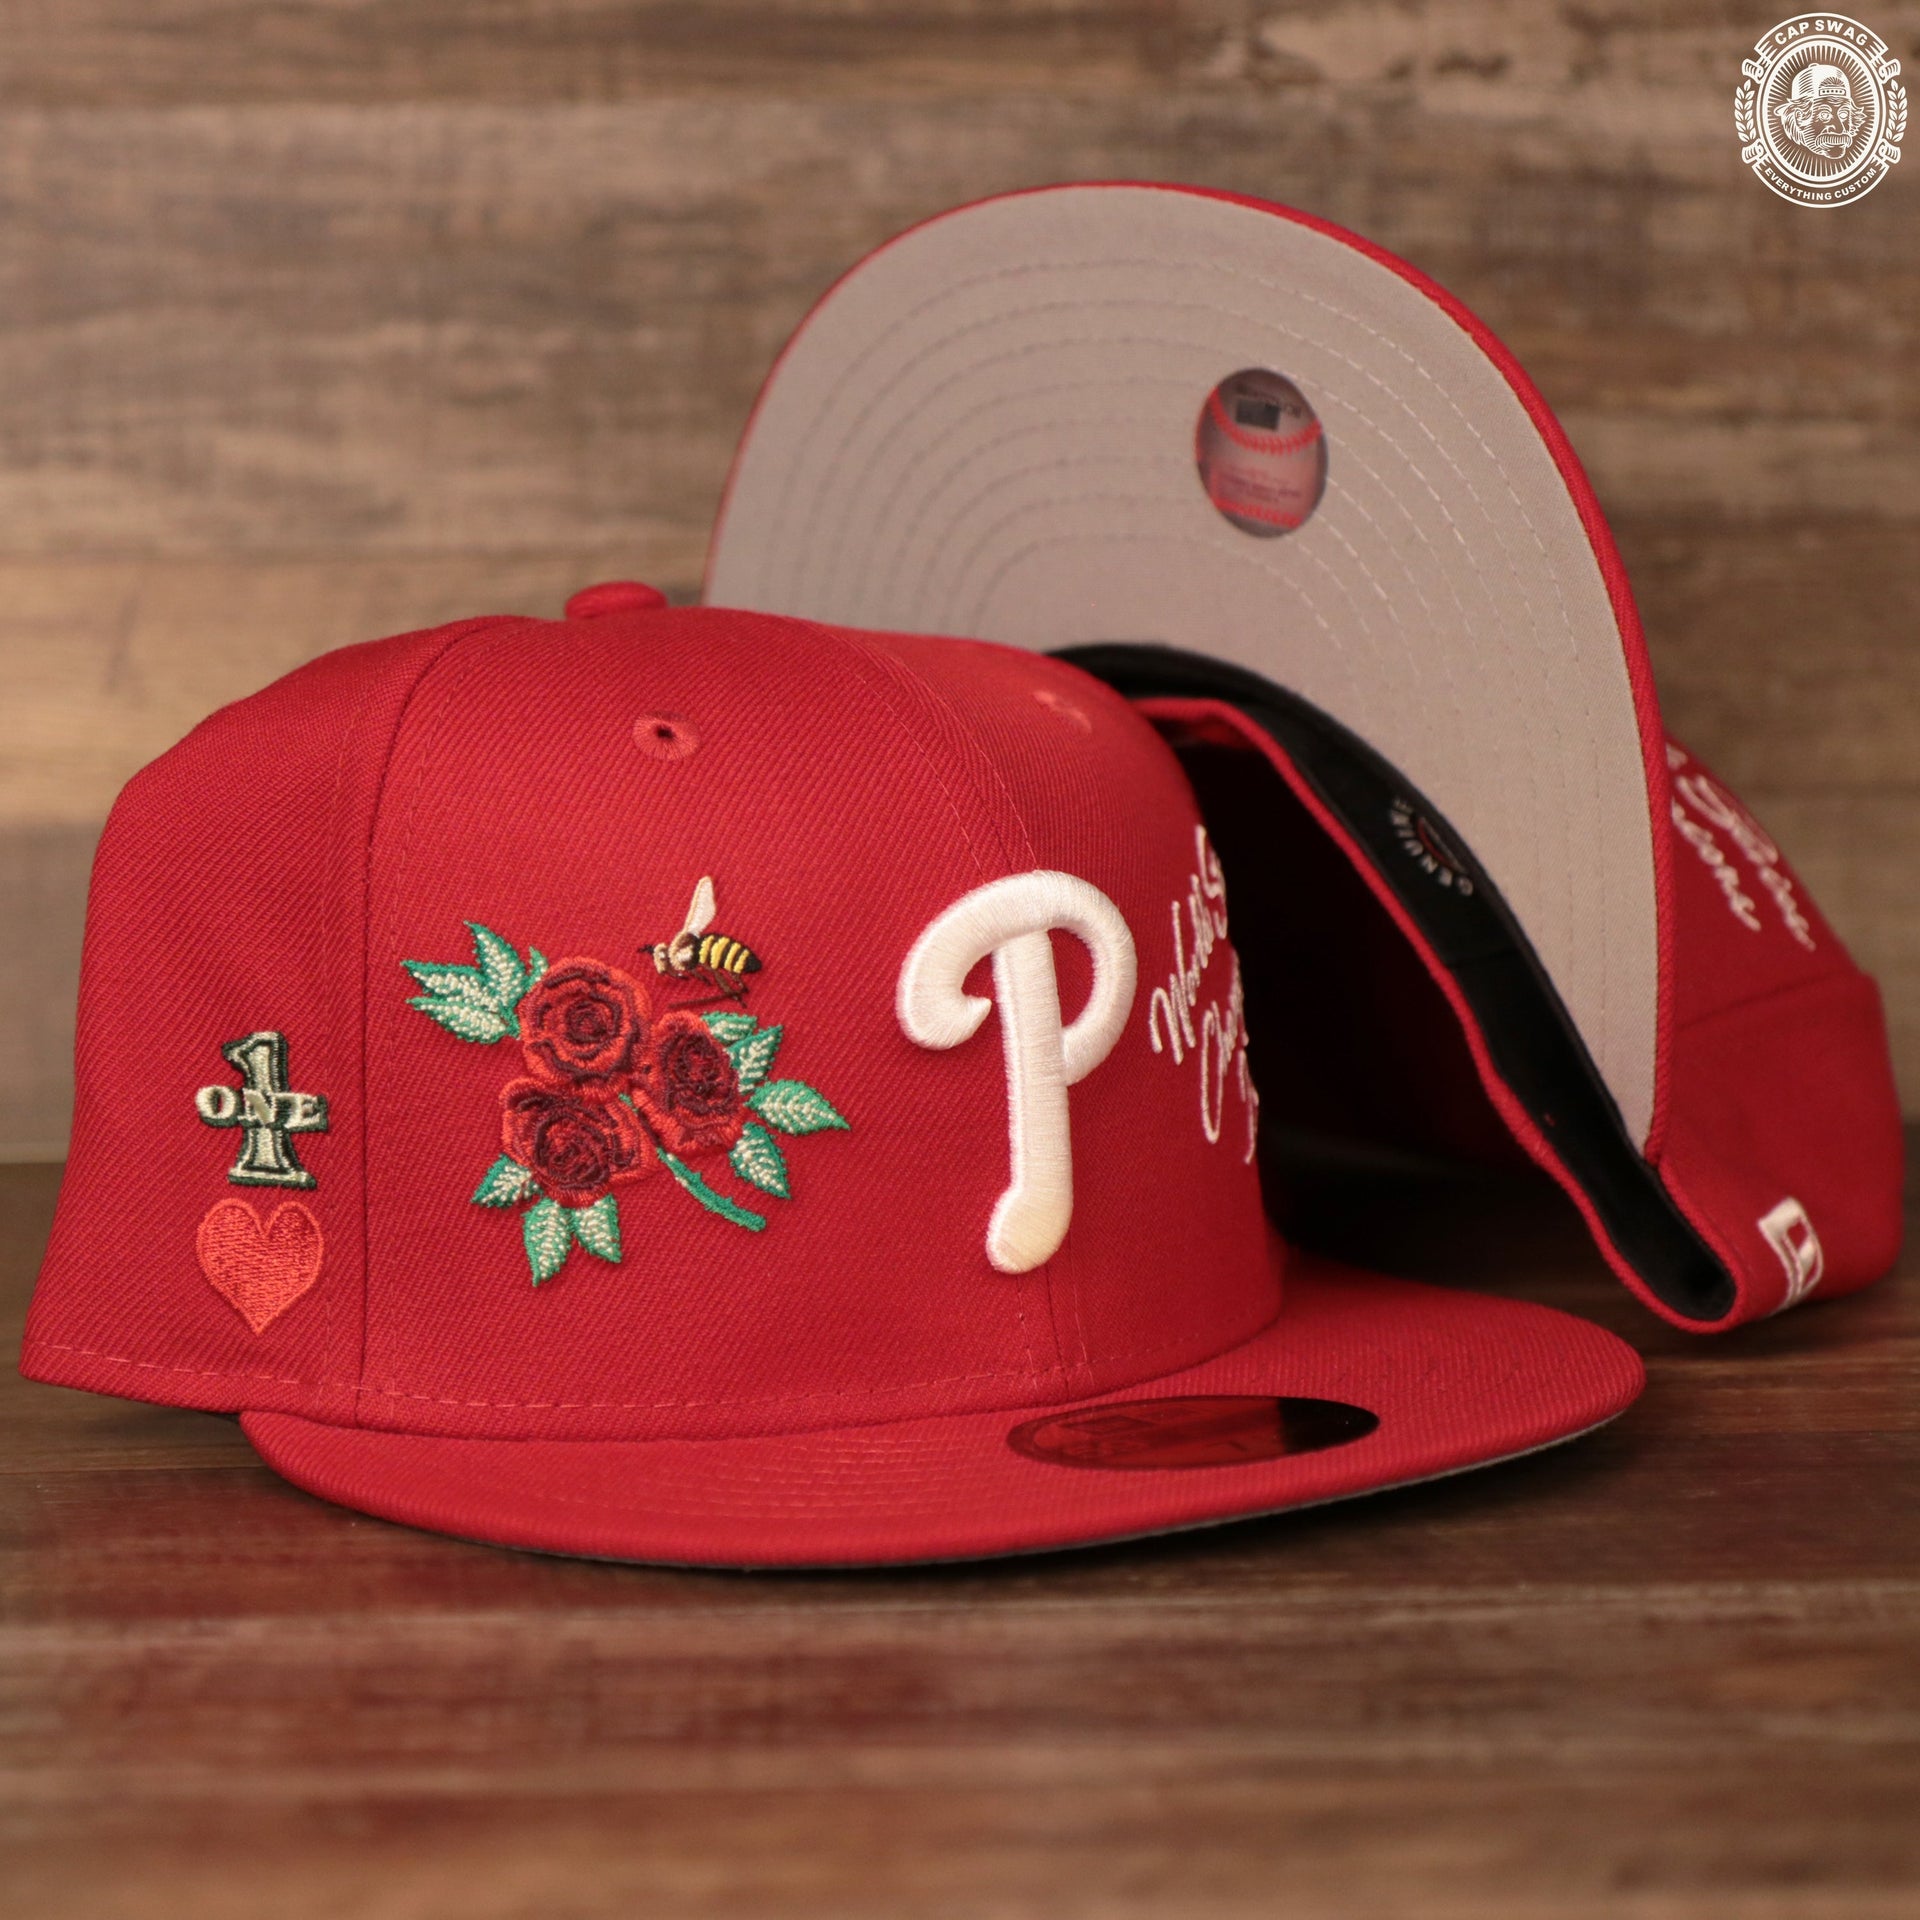 The all over patch fitted 59fifty, with its grey underbrim, the 2X champions, and The Phillies logo